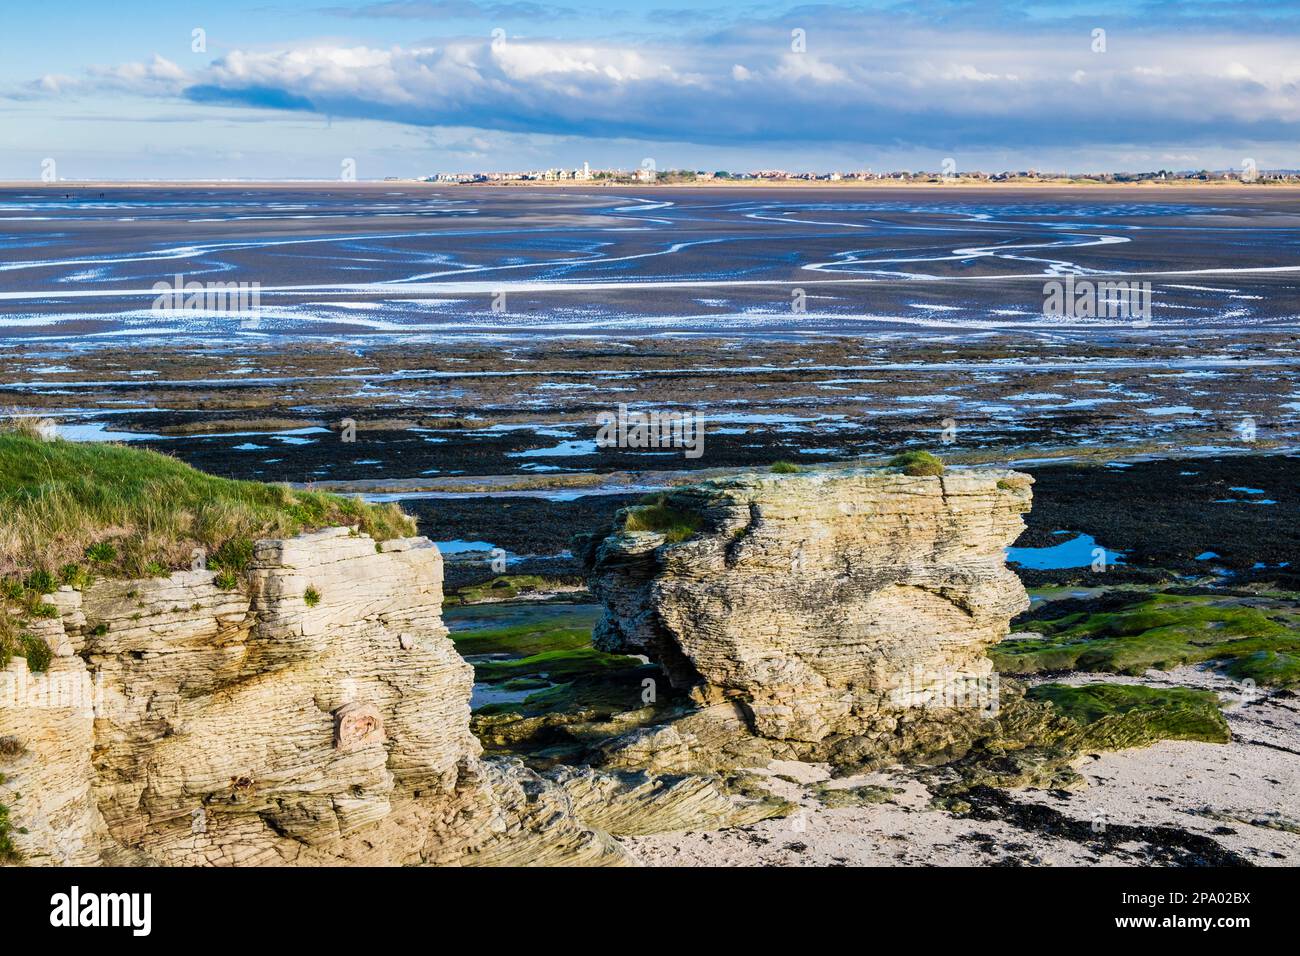 View to Hoylake from Little Hilbre island in Dee Estuary at low tide. West Kirby, Wirral Peninsula, Merseyside, England, UK, Britain Stock Photo